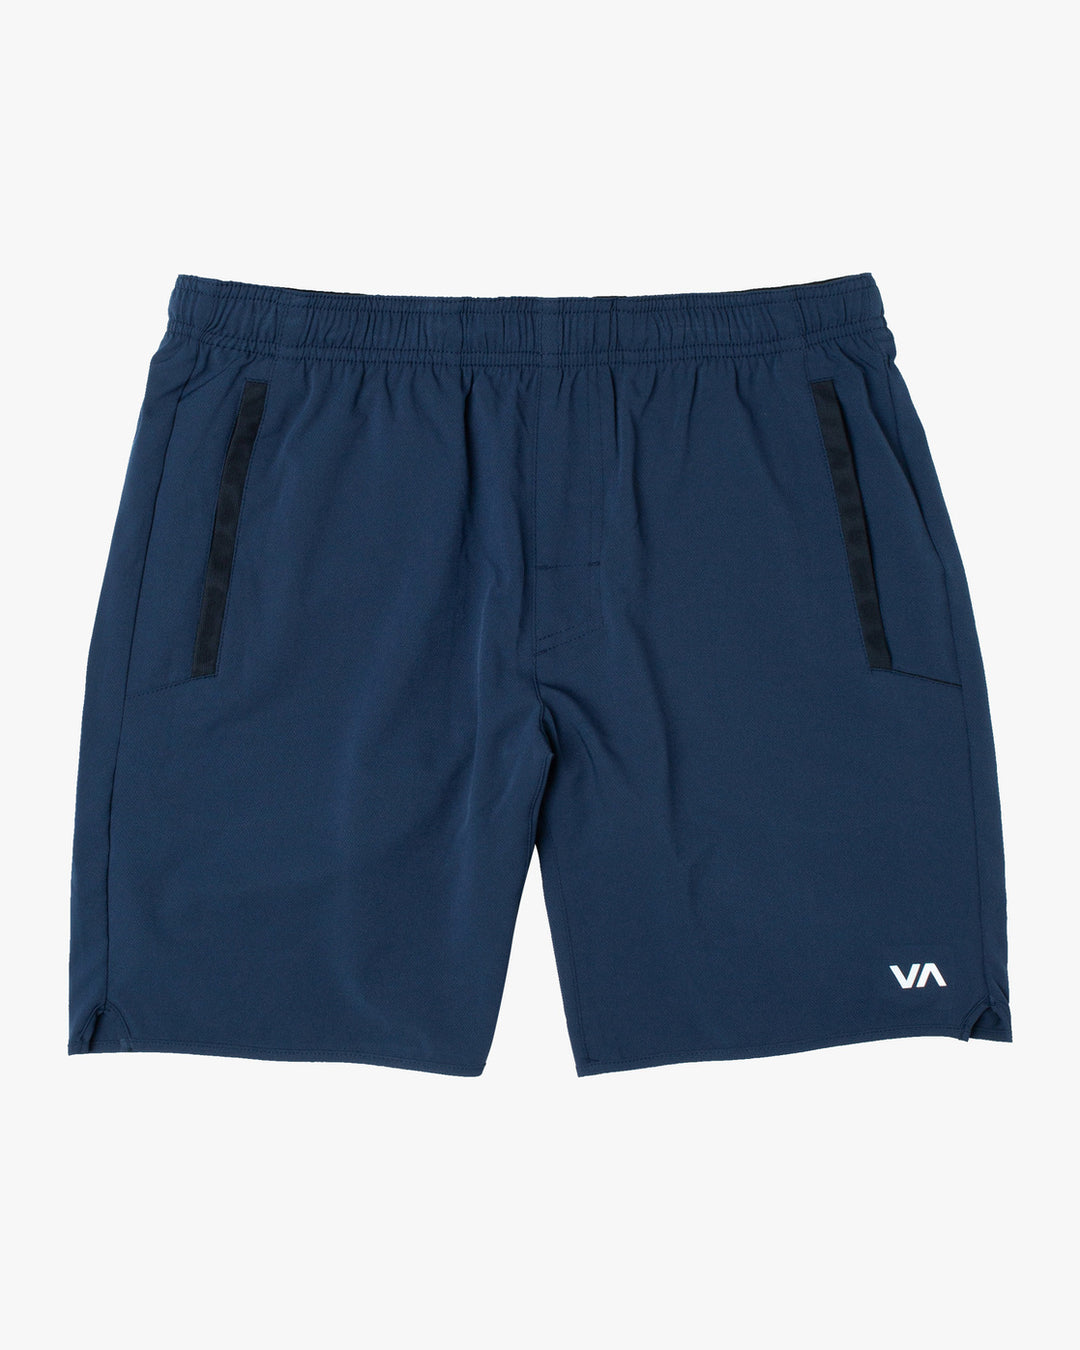 RVCA Yogger Stretch Athletic Shorts 17" - Midnight (Front Detail)